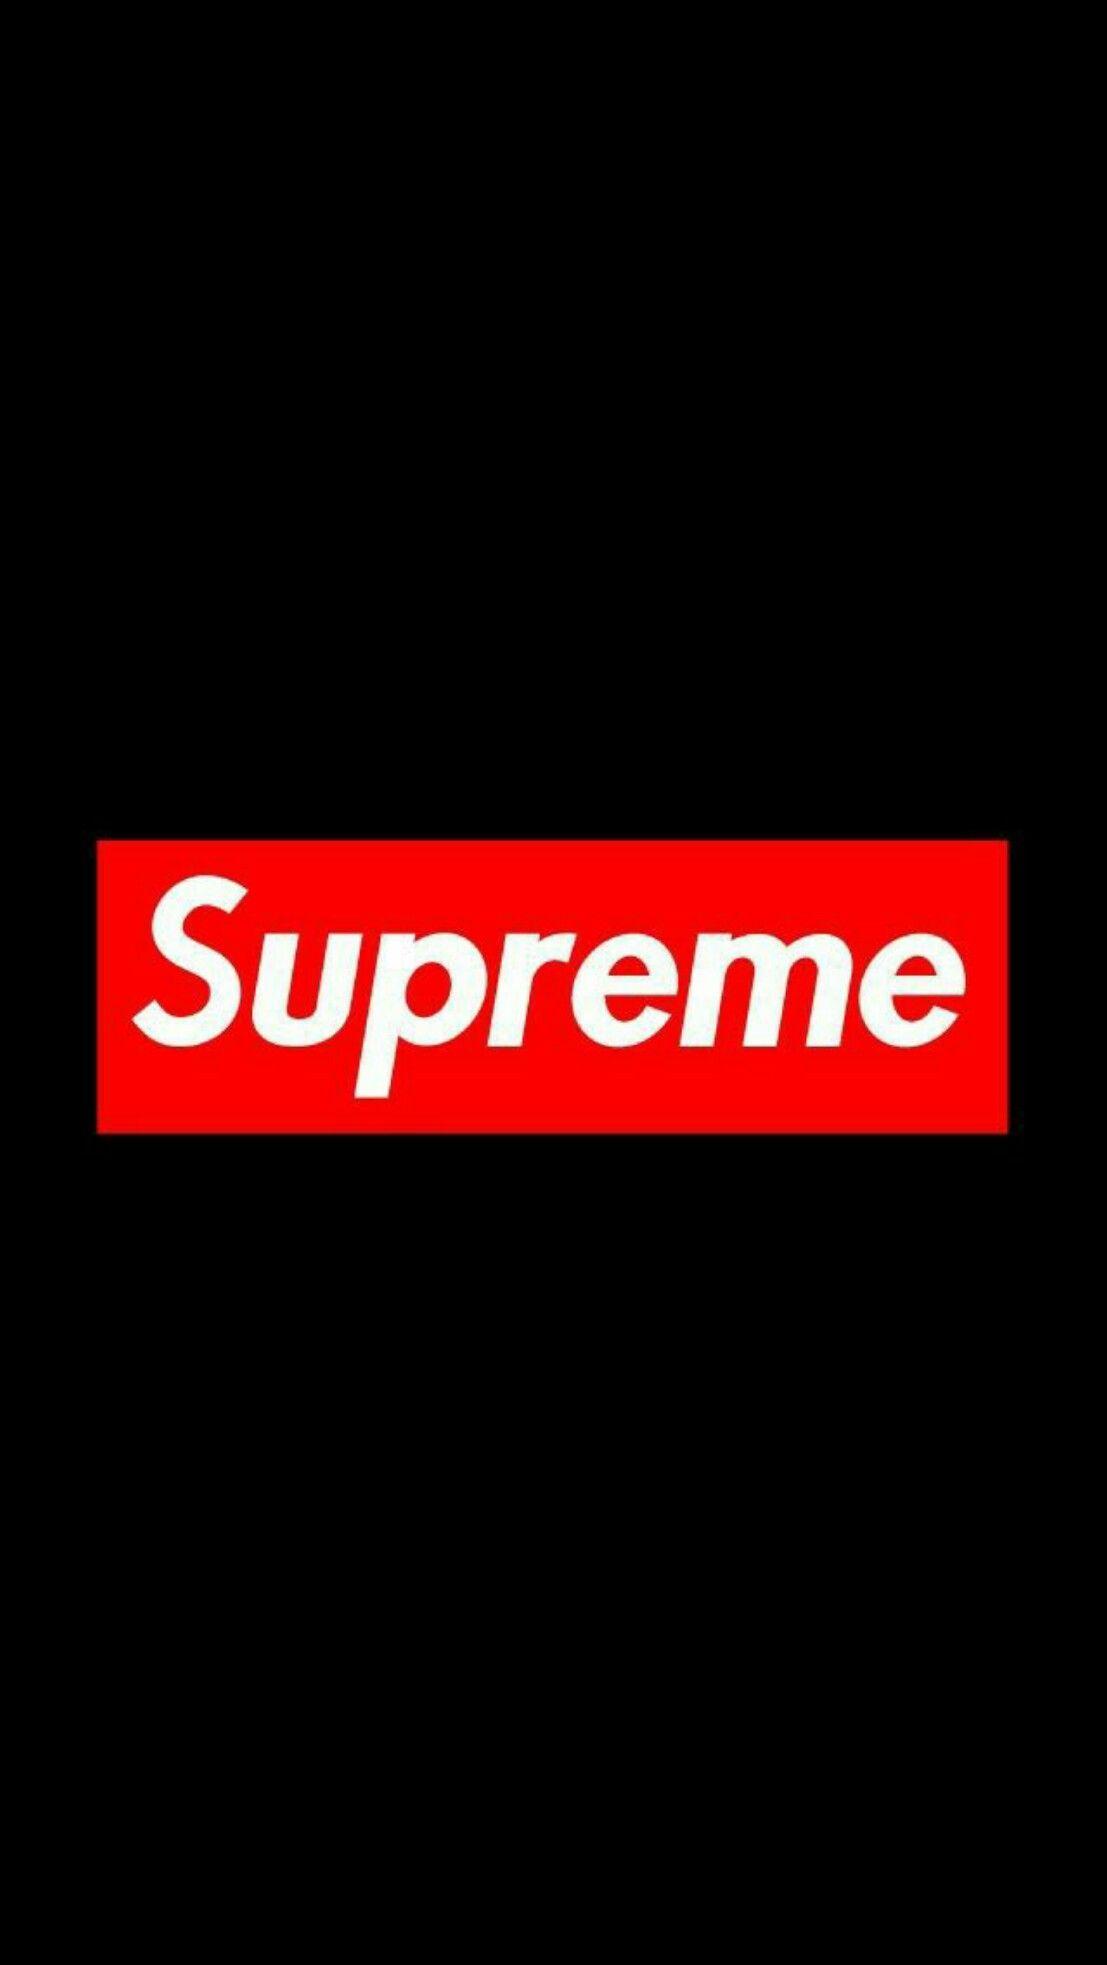 Nike Supreme Iphone Wallpapers Top Free Nike Supreme Iphone Backgrounds Wallpaperaccess